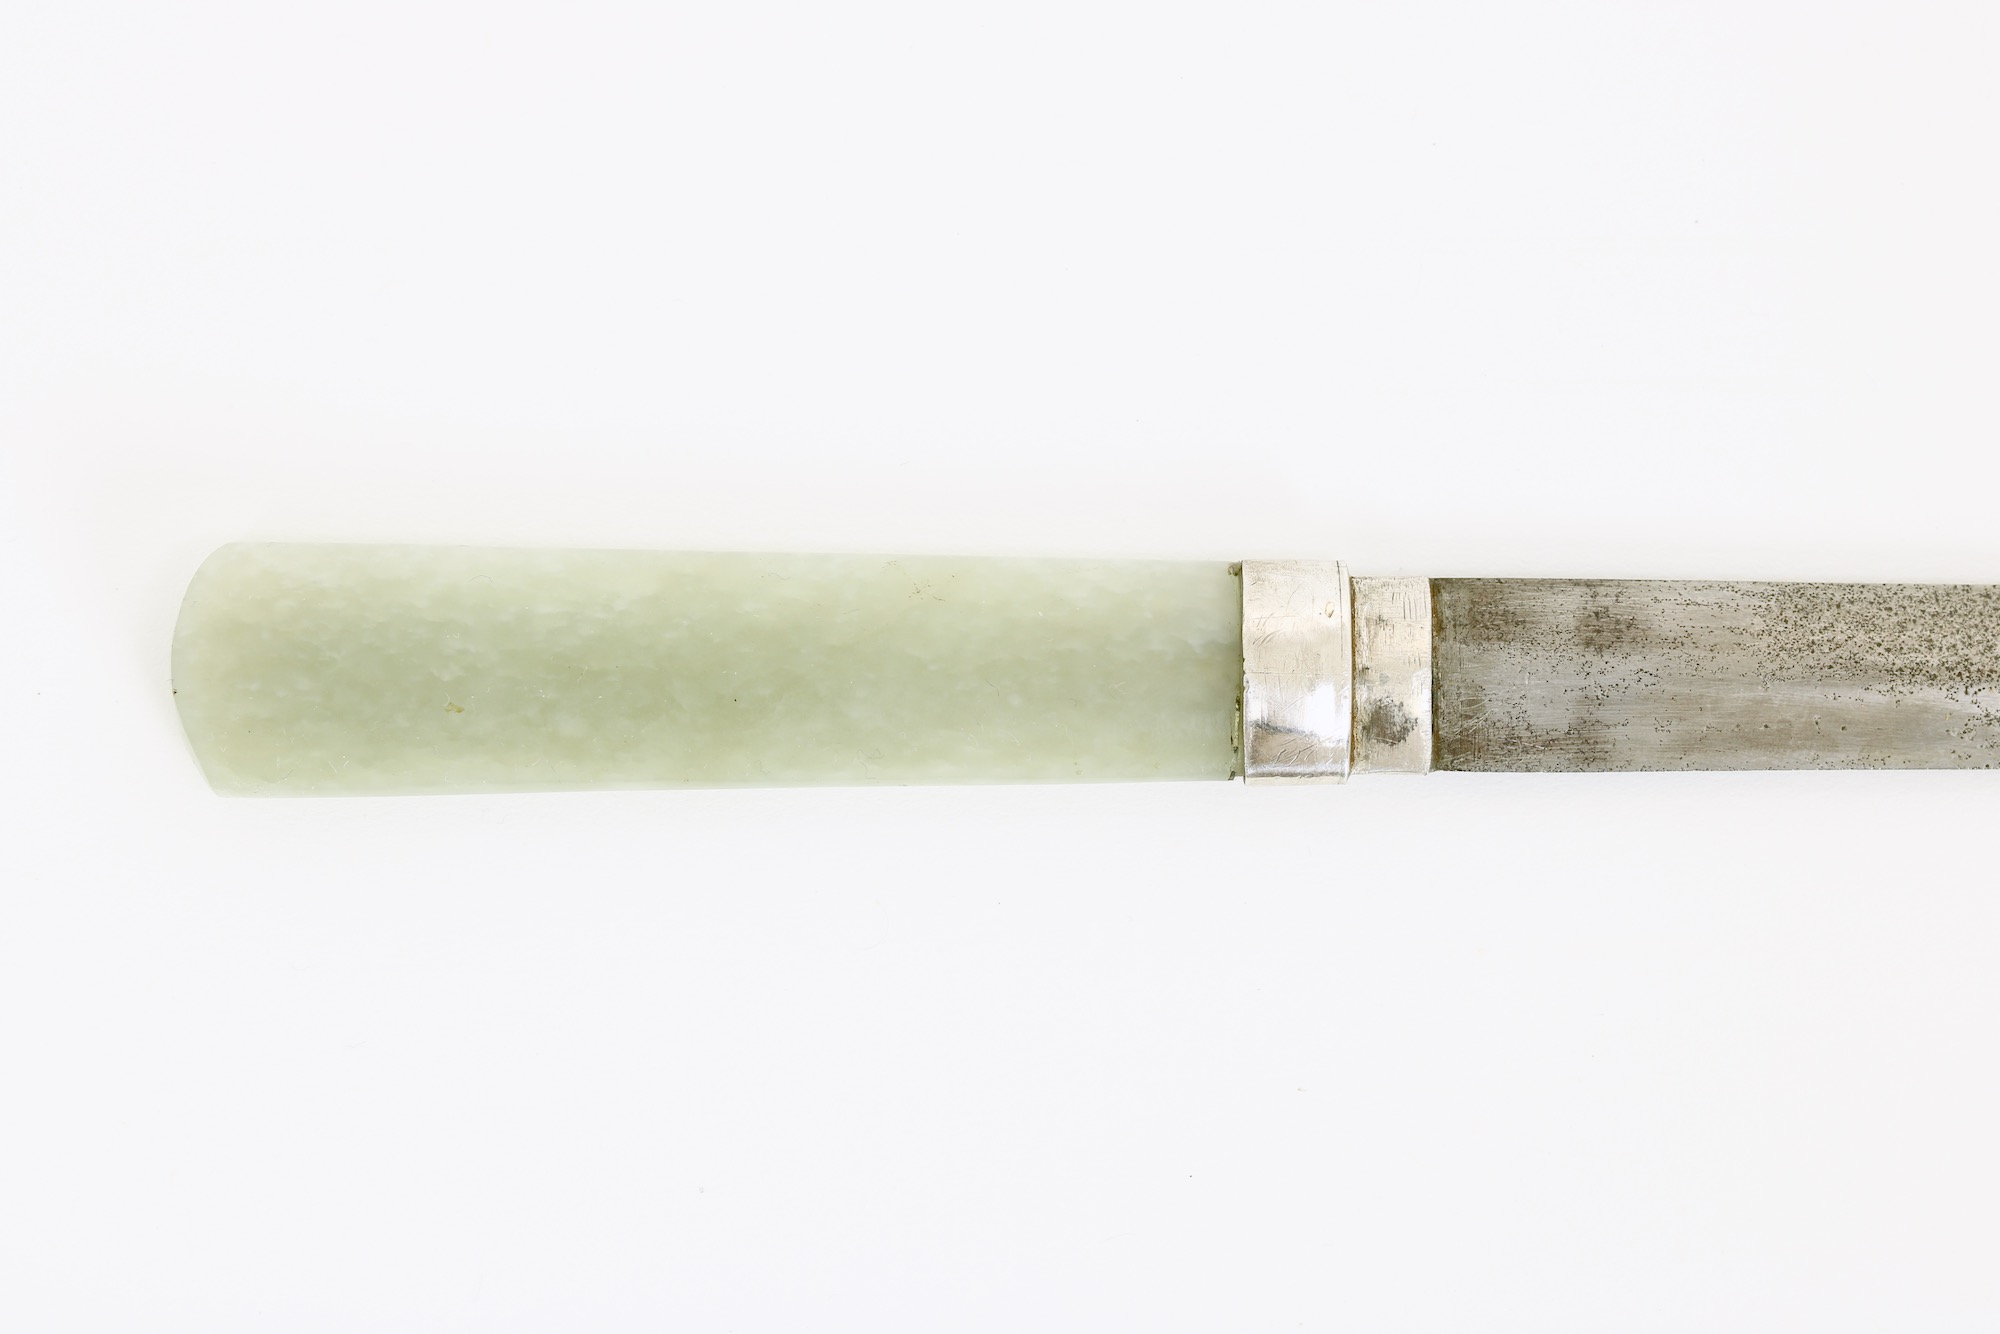 Antique Chinese knife in Mongolian style with double edged blade and jade handle